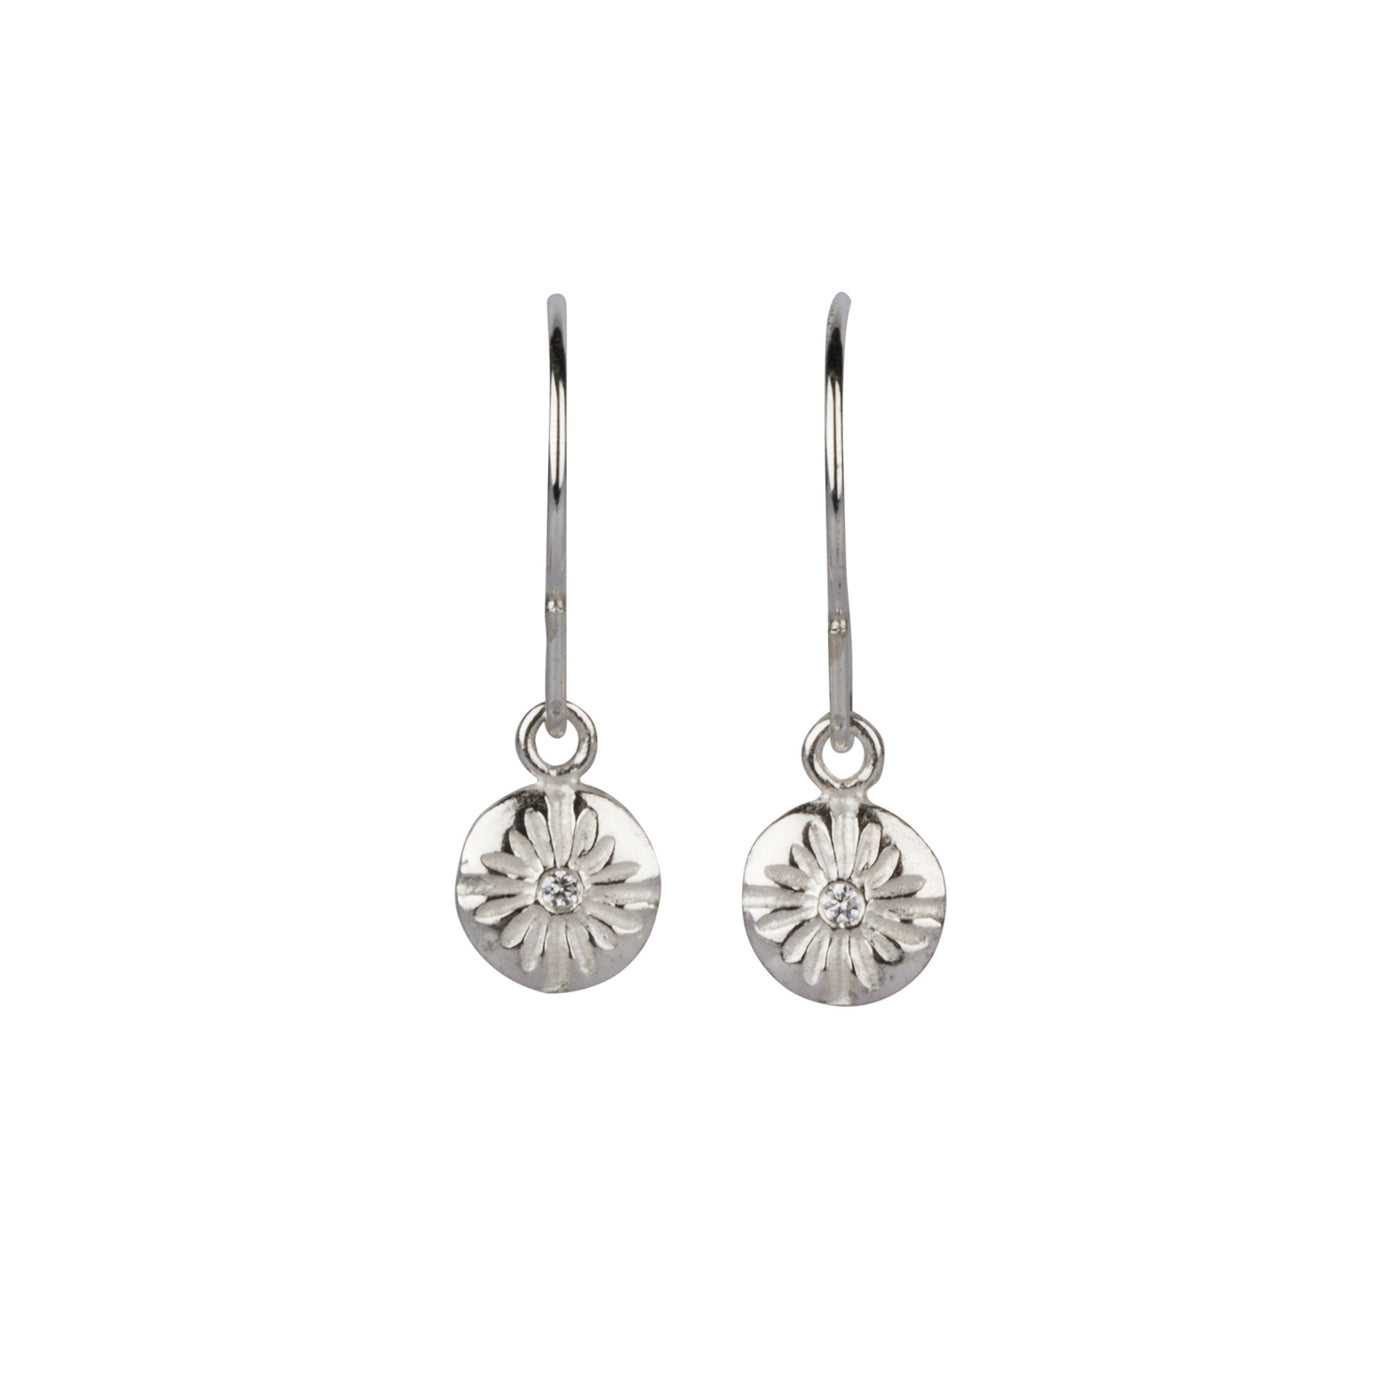 Lucia Small Dangle Earrings in Silver on a white background | Corey Egan